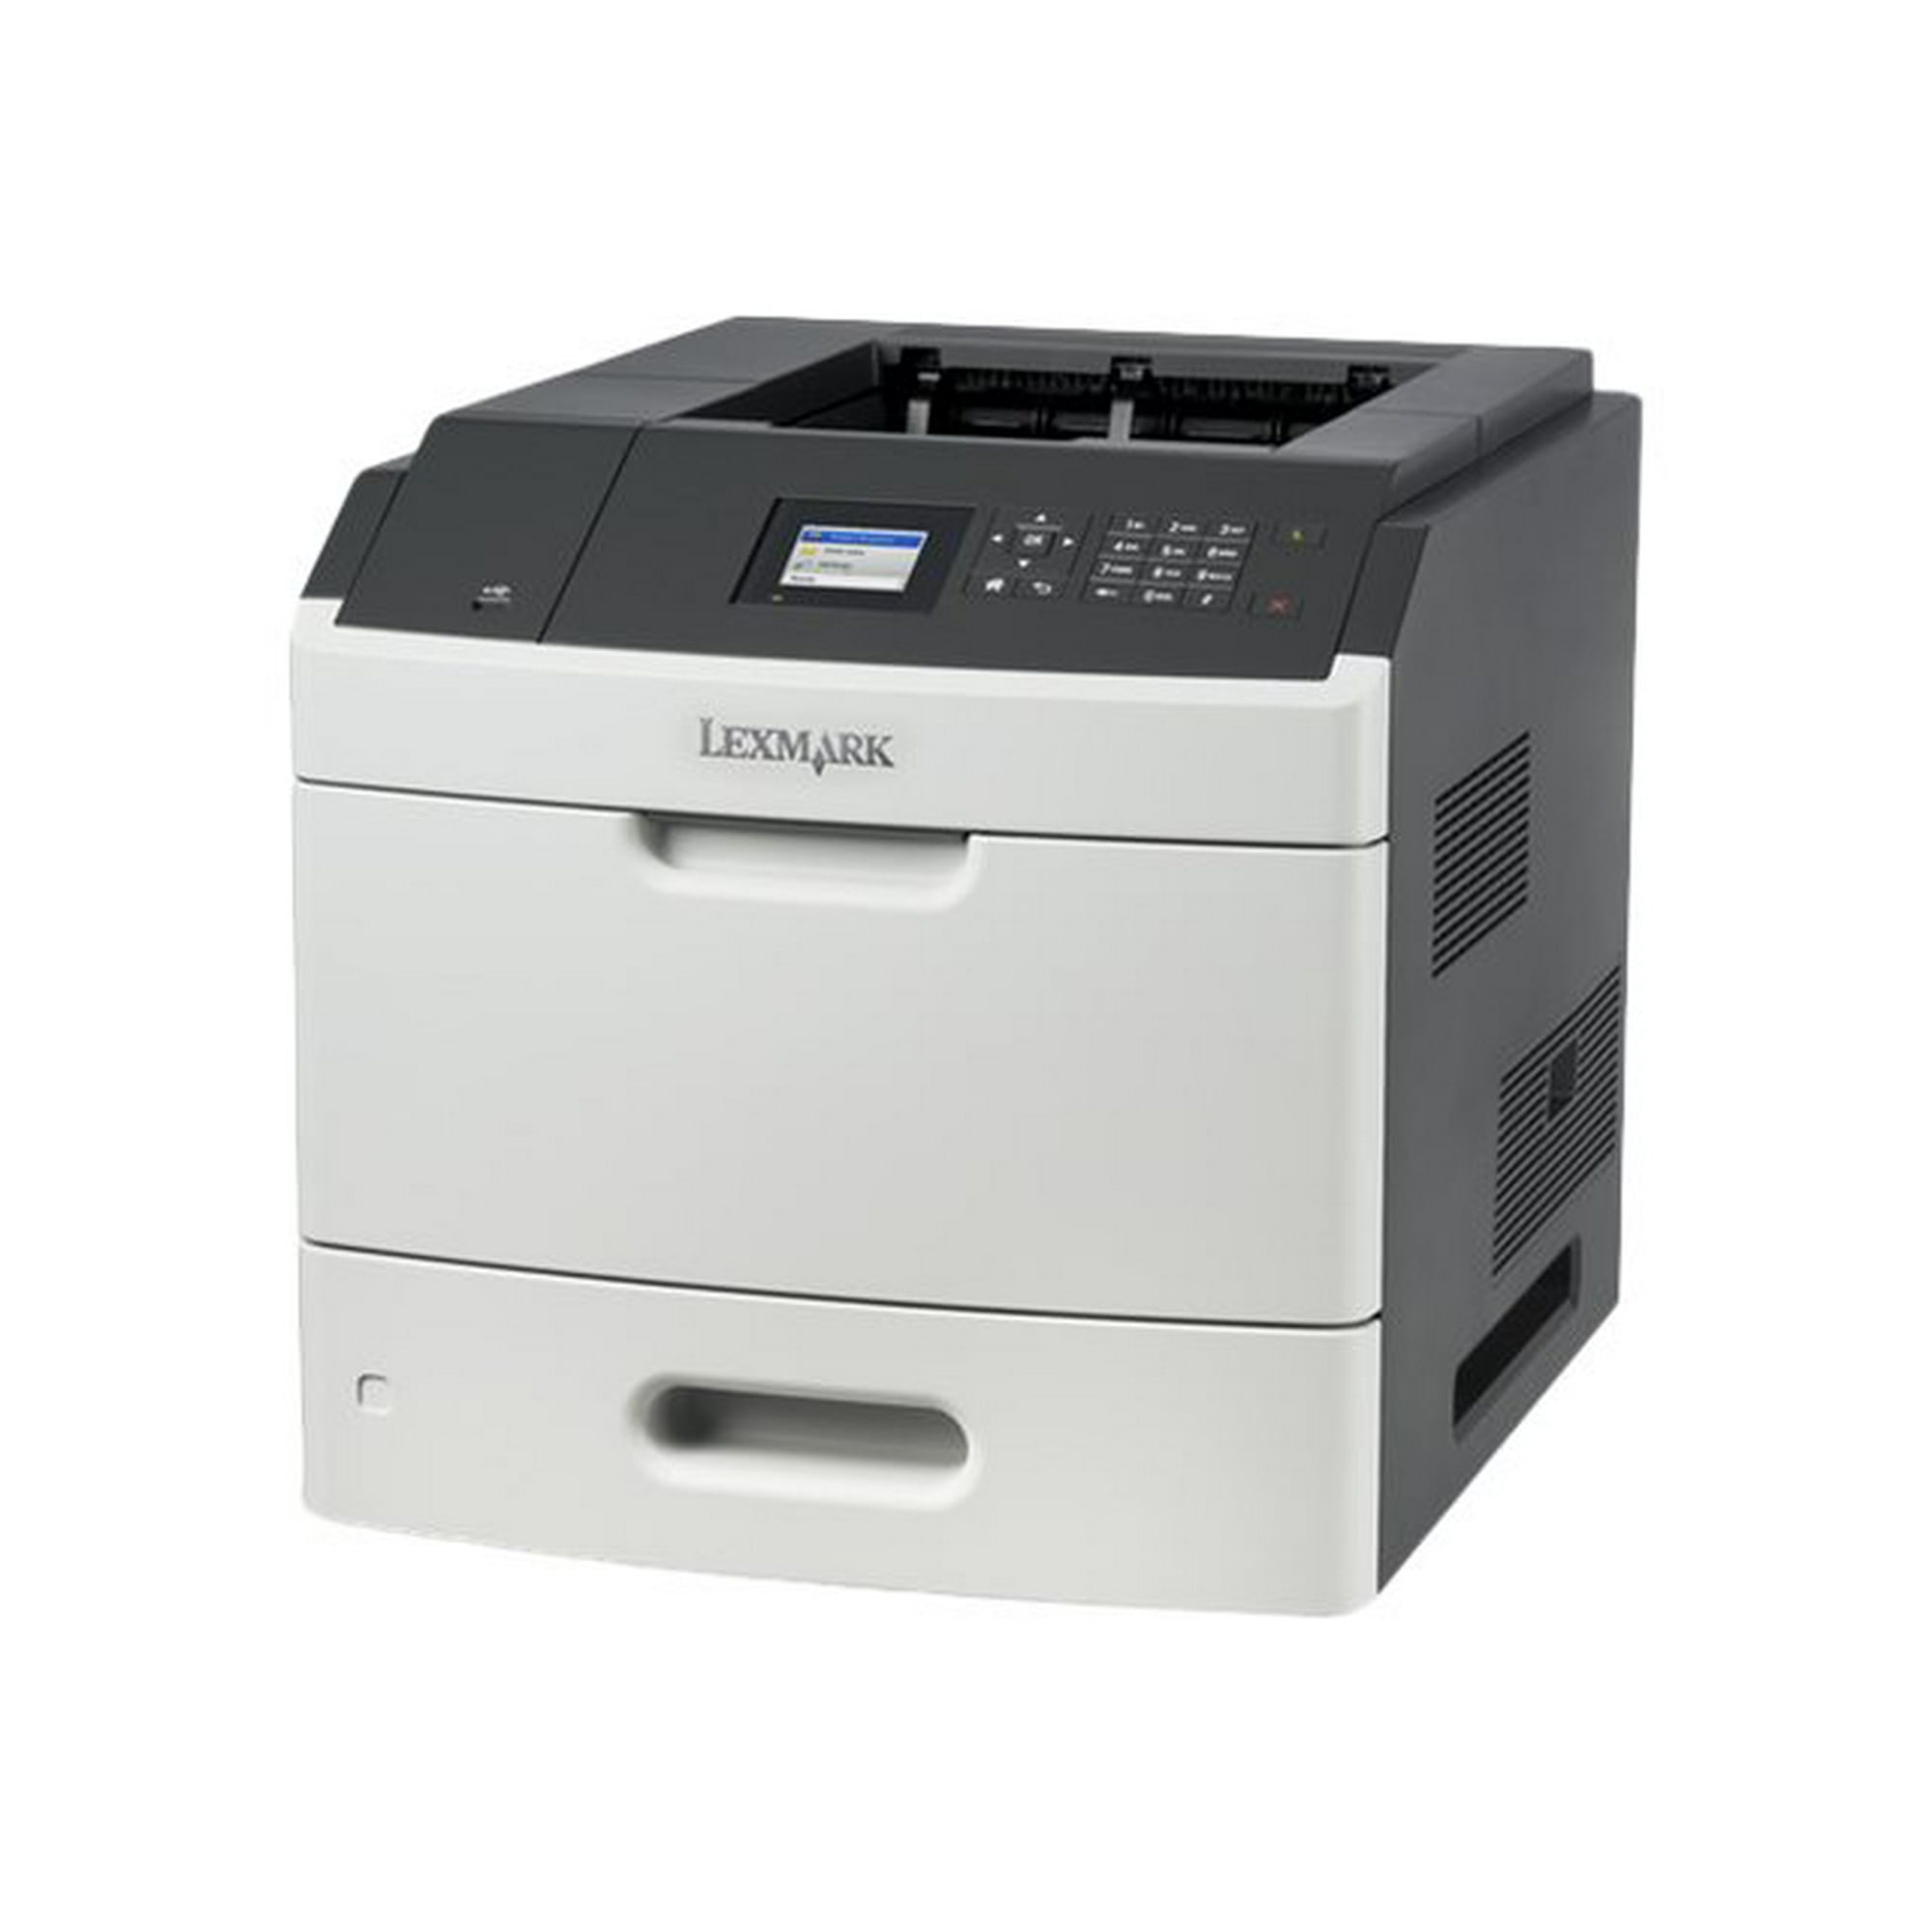 Lexmark MS811dn - Printer - B/W - Duplex - laser - A4/Legal 1200 x 1200 dpi up to 63 ppm - capacity: 650 sheets - USB 2.0, Gigabit LAN, USB 2.0 host with 1 year Exchange Service | Canada